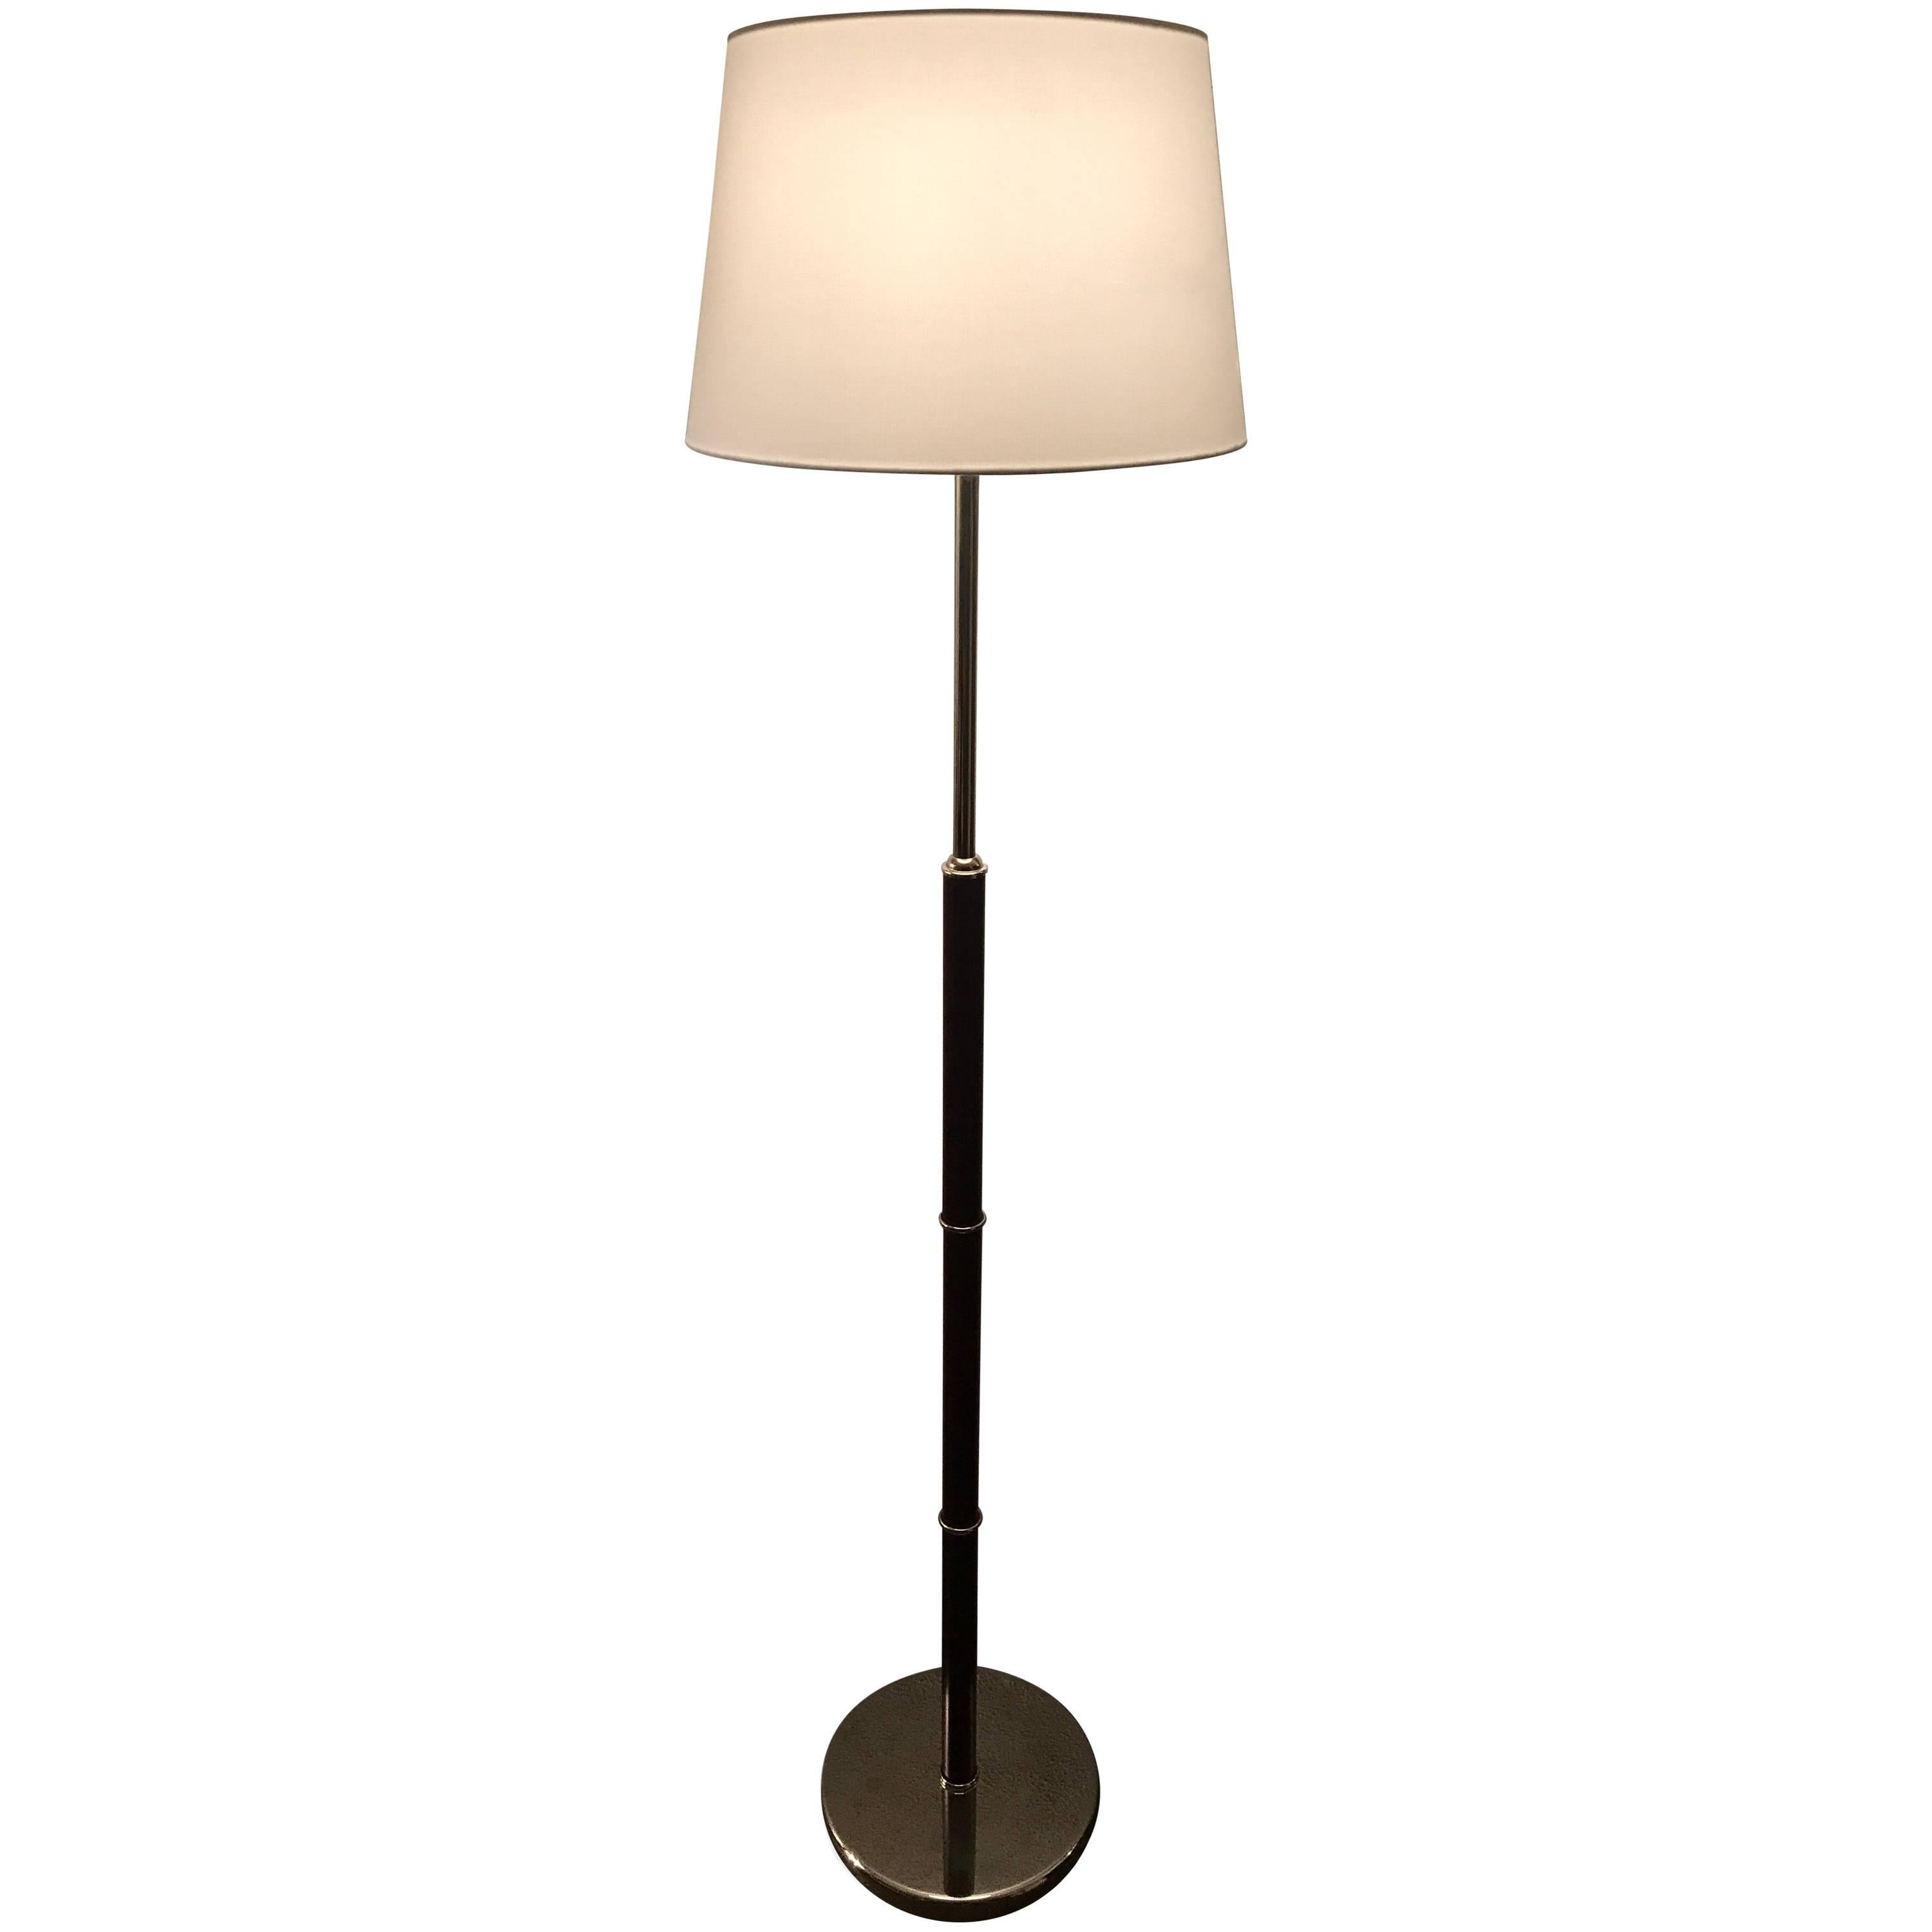 Rare Swedish Cherrywood and Steel Floor Lamp Made by Belid AB, 1980 For Sale